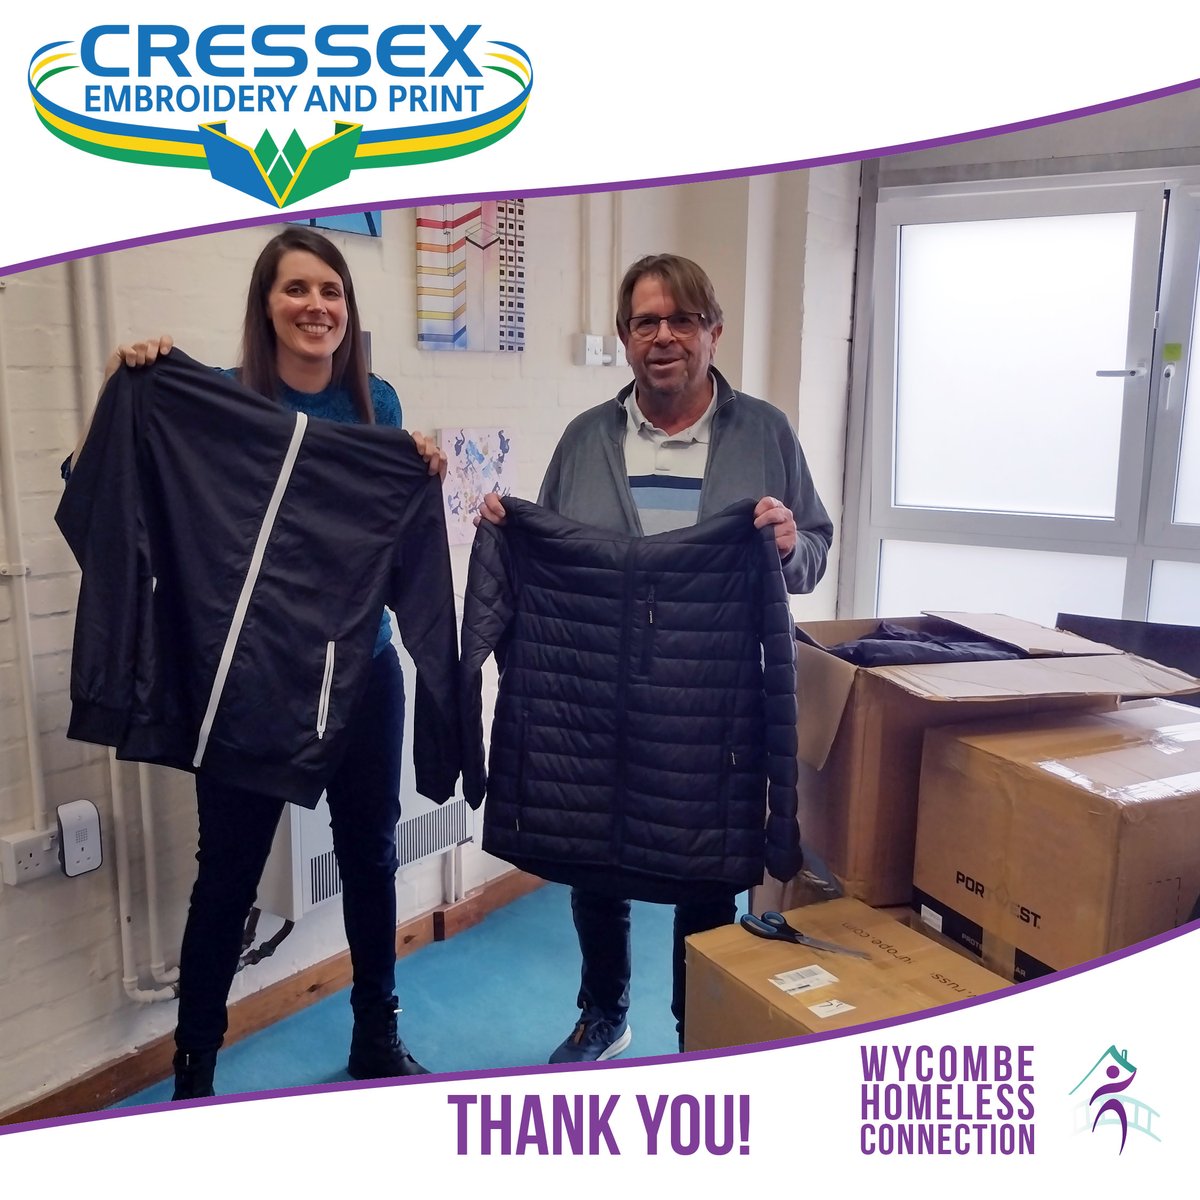 Our support workers Manon and Kevin were thrilled to receive a huge donation of clothing from @CressexEmb. These will help people who are sleeping rough to layer up and stay safer and warmer while we work towards finding suitable accommodation for them.